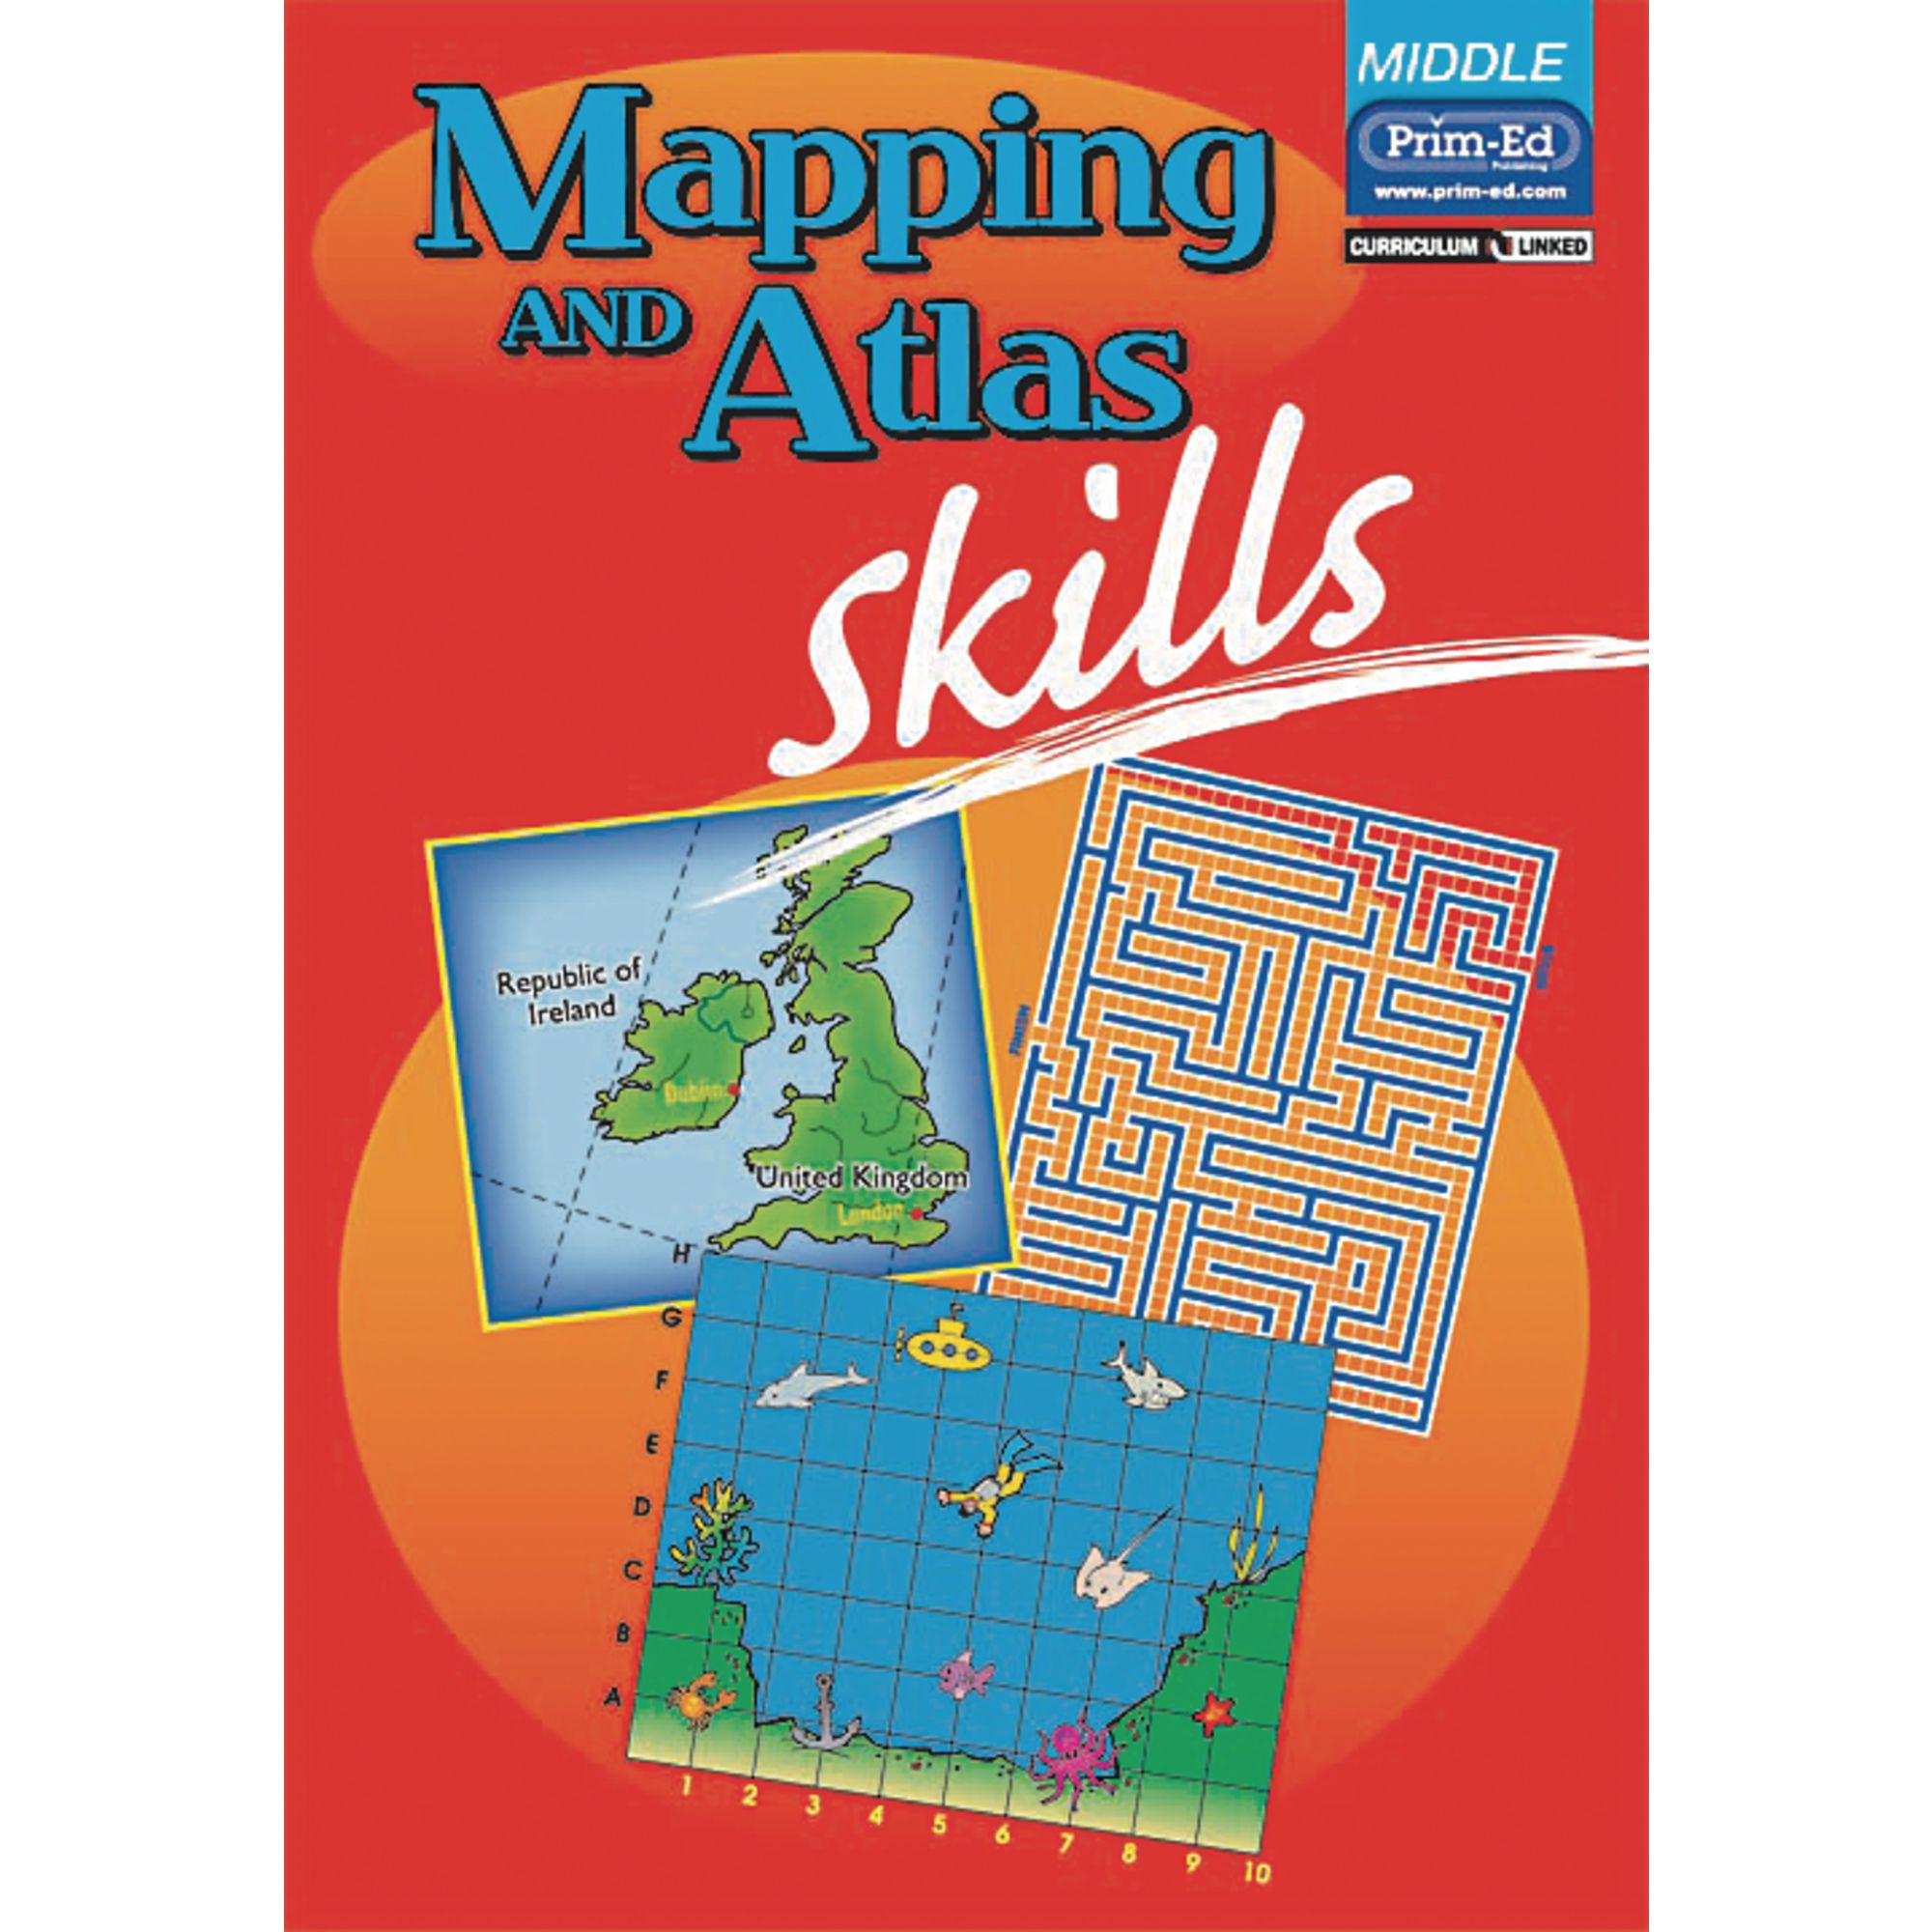 Mapping And Atlas Skills - Middle